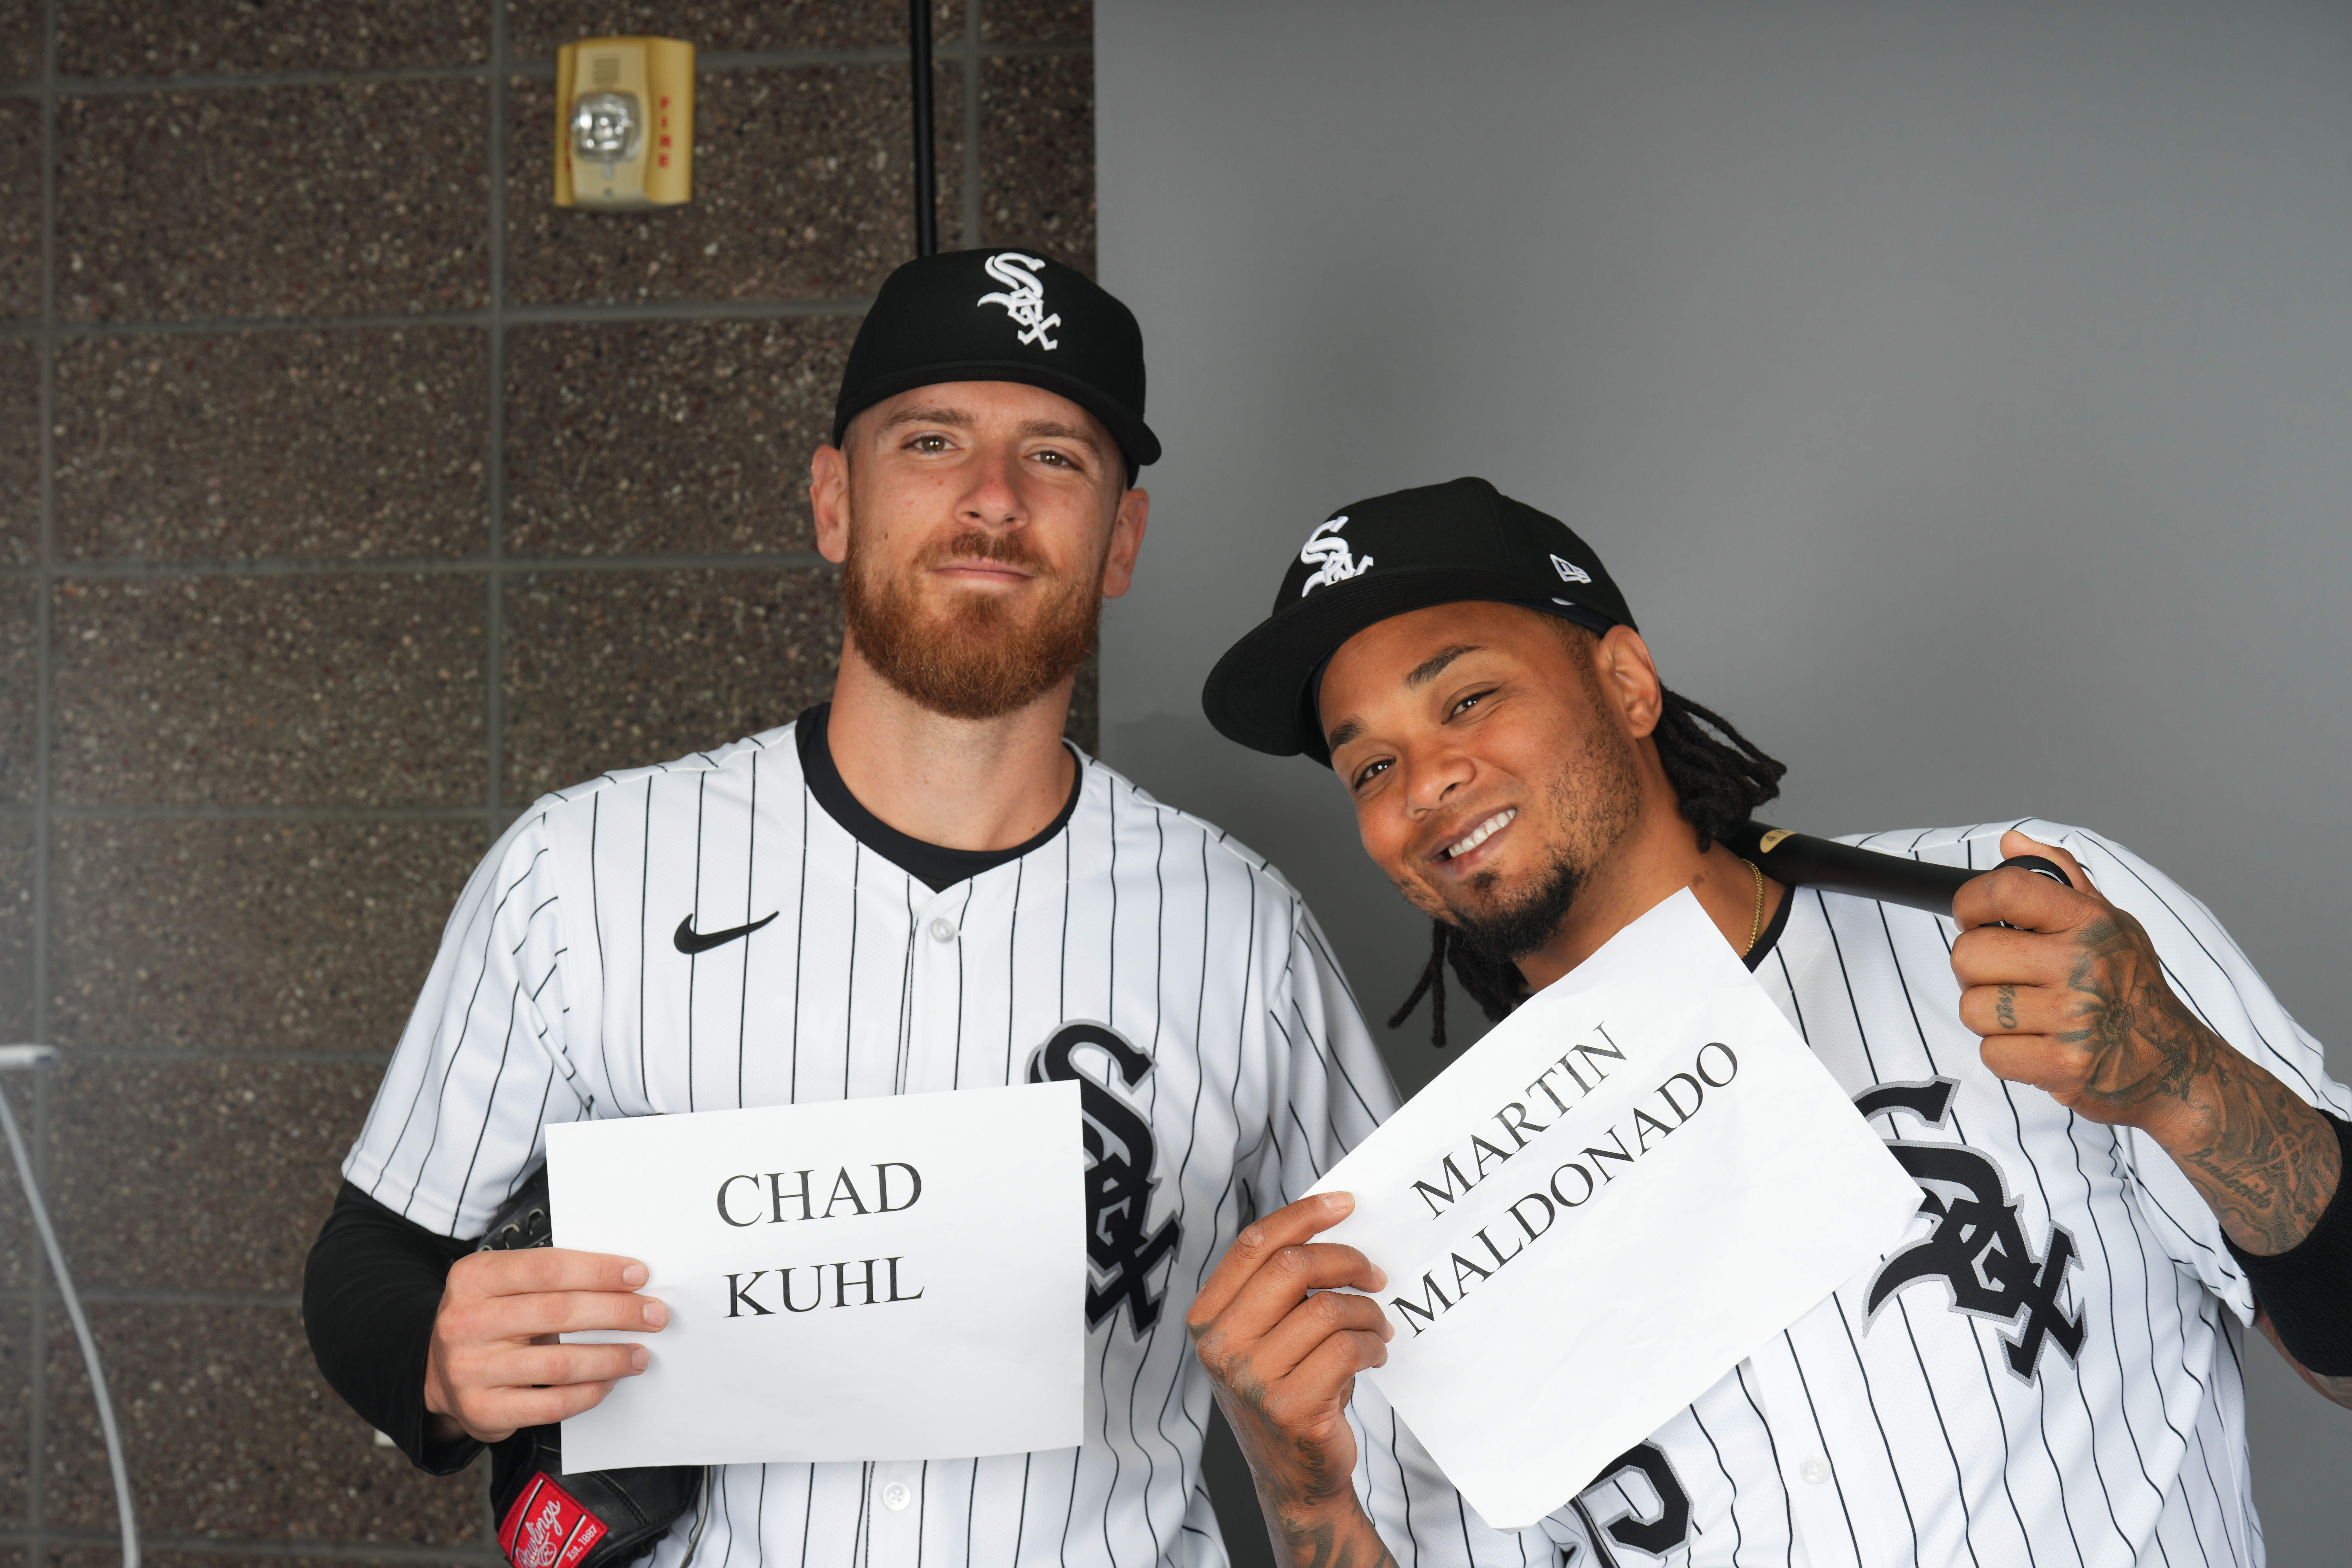 Chad Kuhl is with the White Sox organization